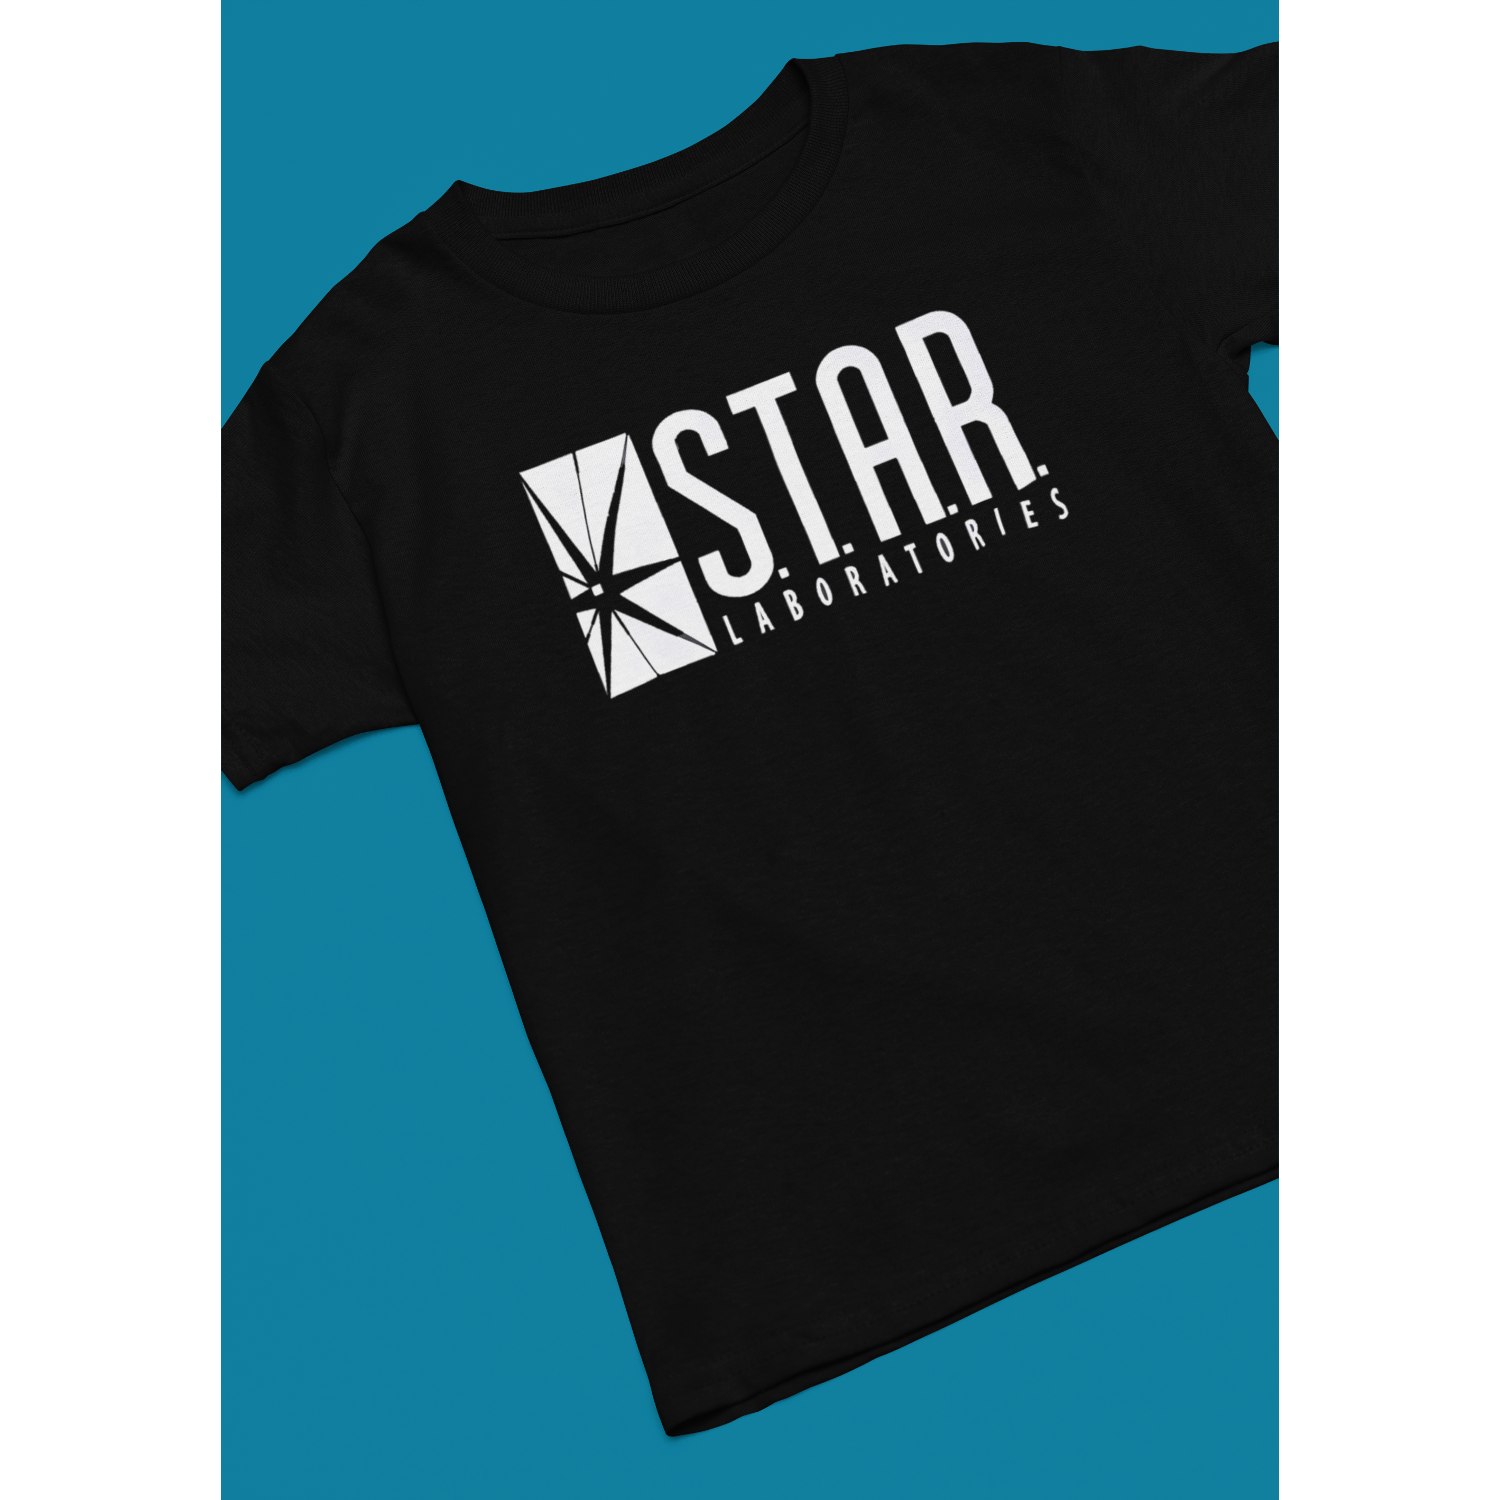 Retro tees black short sleeve men's unisex t-shirt featuring Star Laboratories text and logo in white